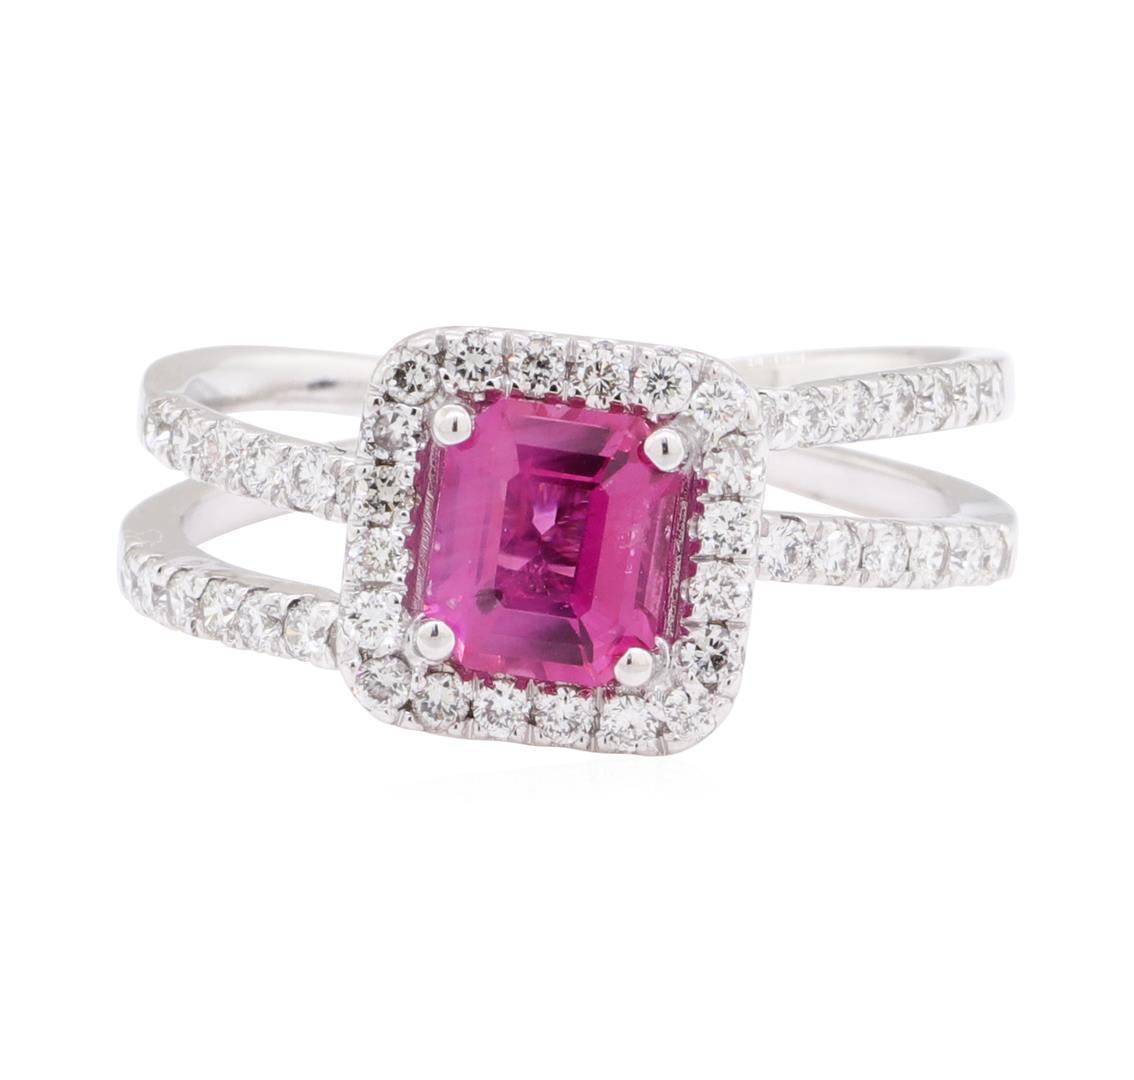 1.76 ctw Pink Sapphire And Diamond Ring - 14KT White Gold